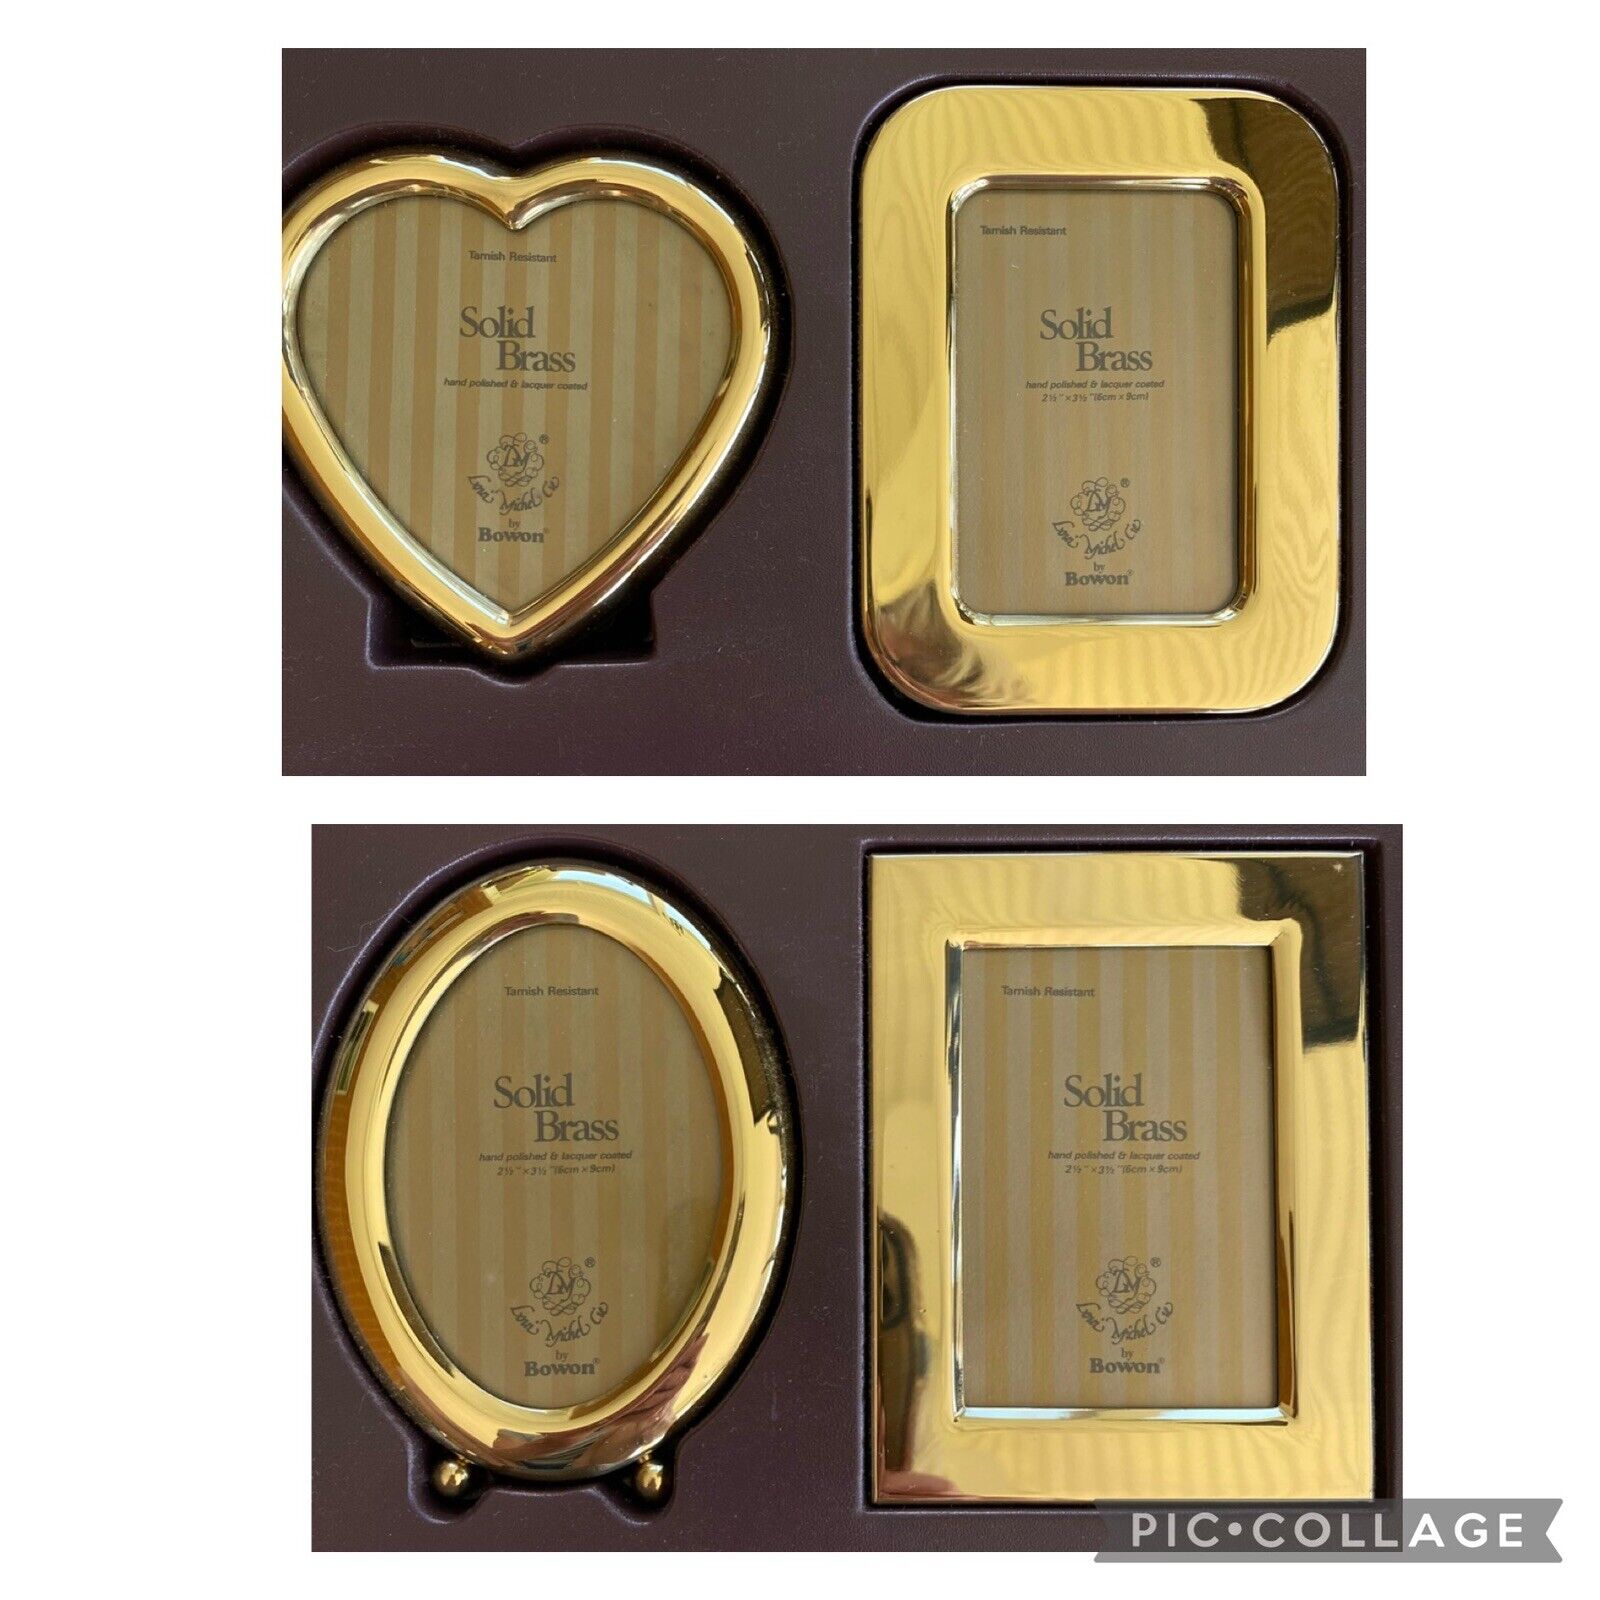 Solid Brass Set Of 4 Bowon Vtg Picture Photo Frames Oval Heart Square 2.5x3.5